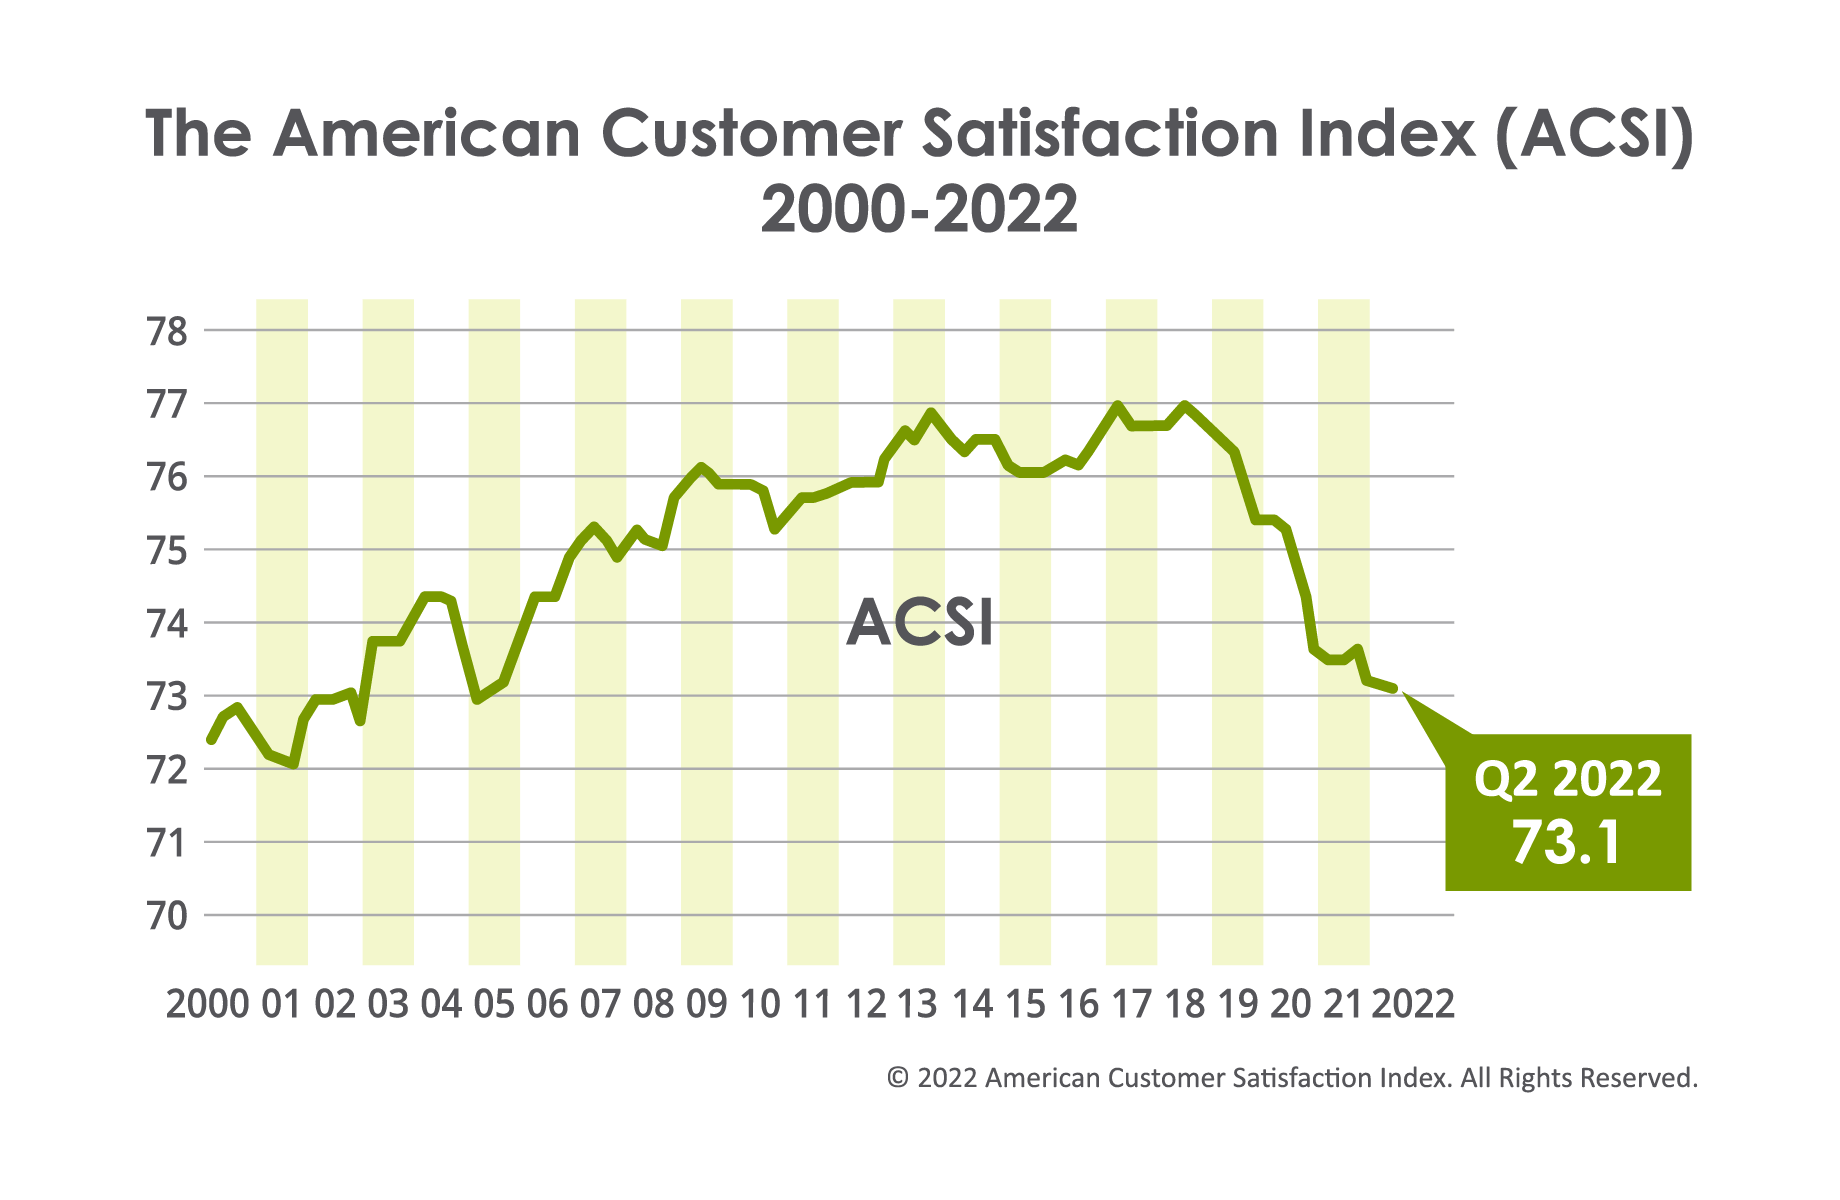 A line graph showing United States customer satisfaction levels from 2000-2022